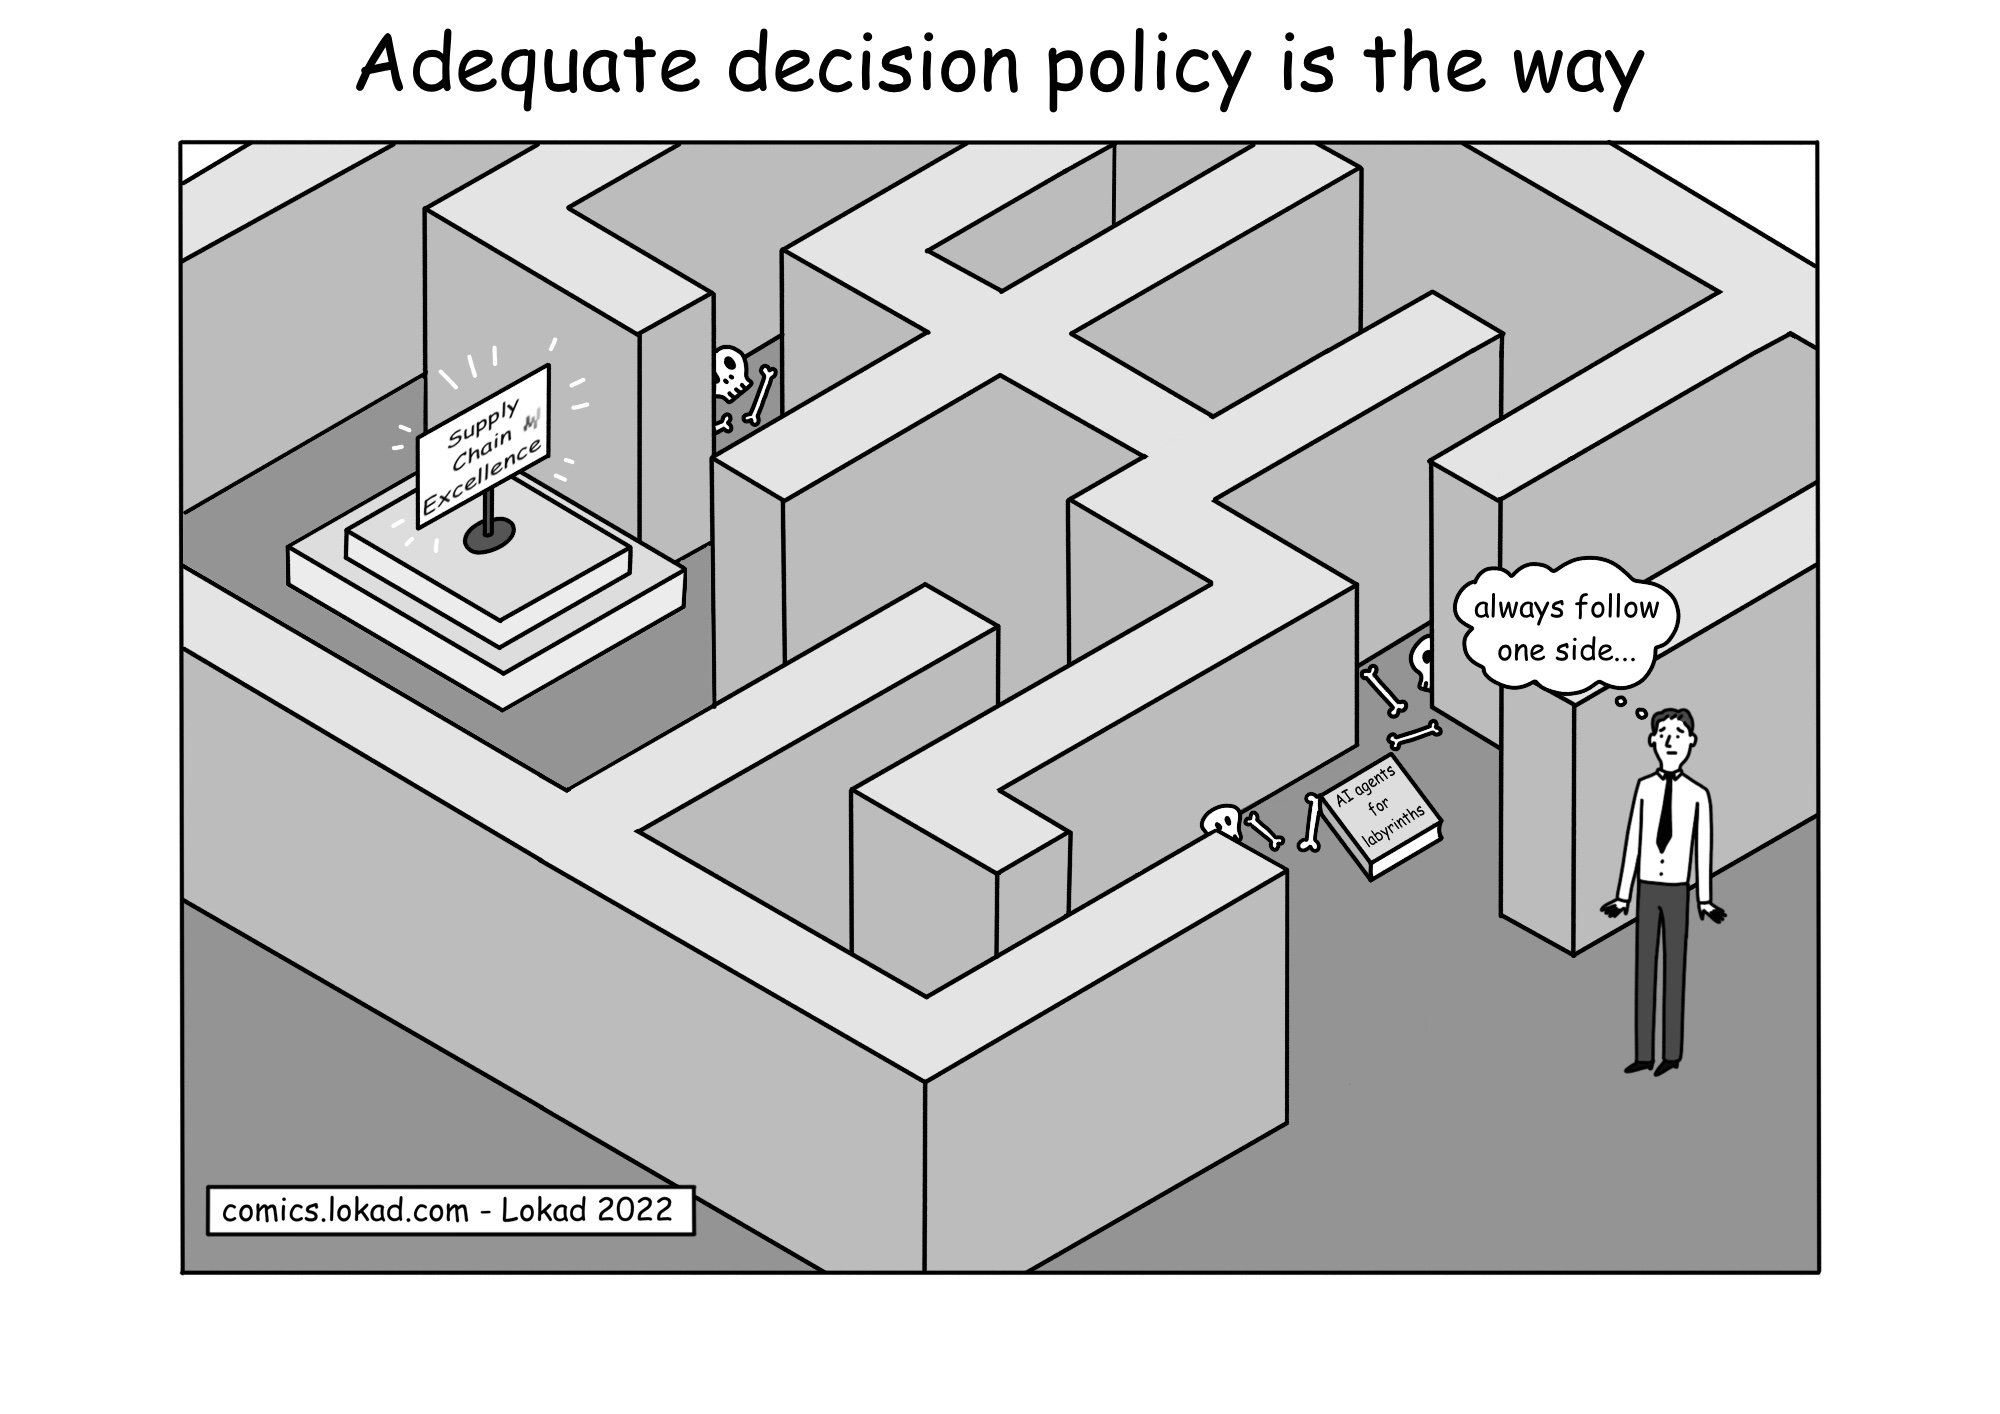 Adequate decision policy is the way